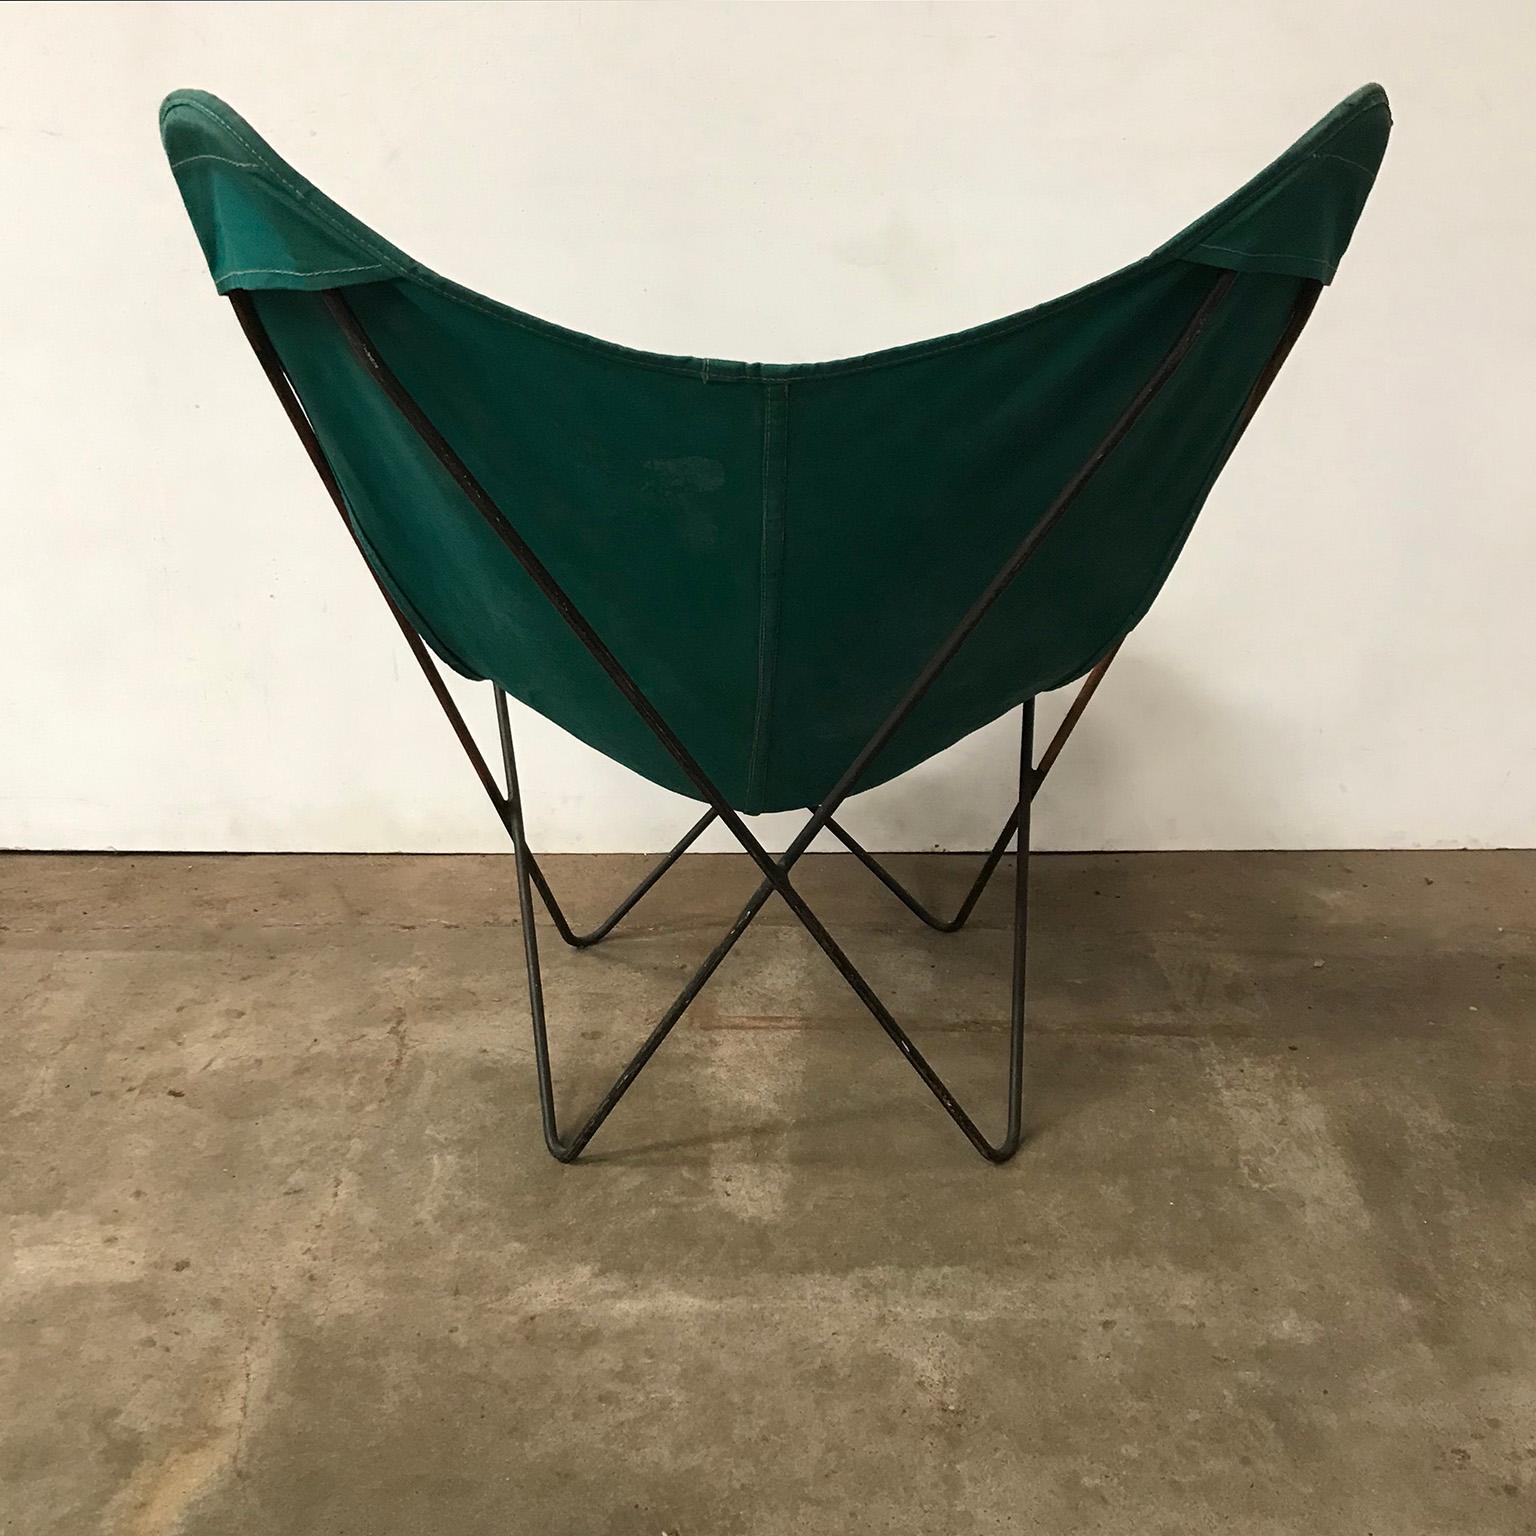 American 1947, Hardoy, Ferrari, Green Cover with Grey Base Butterfly Chair